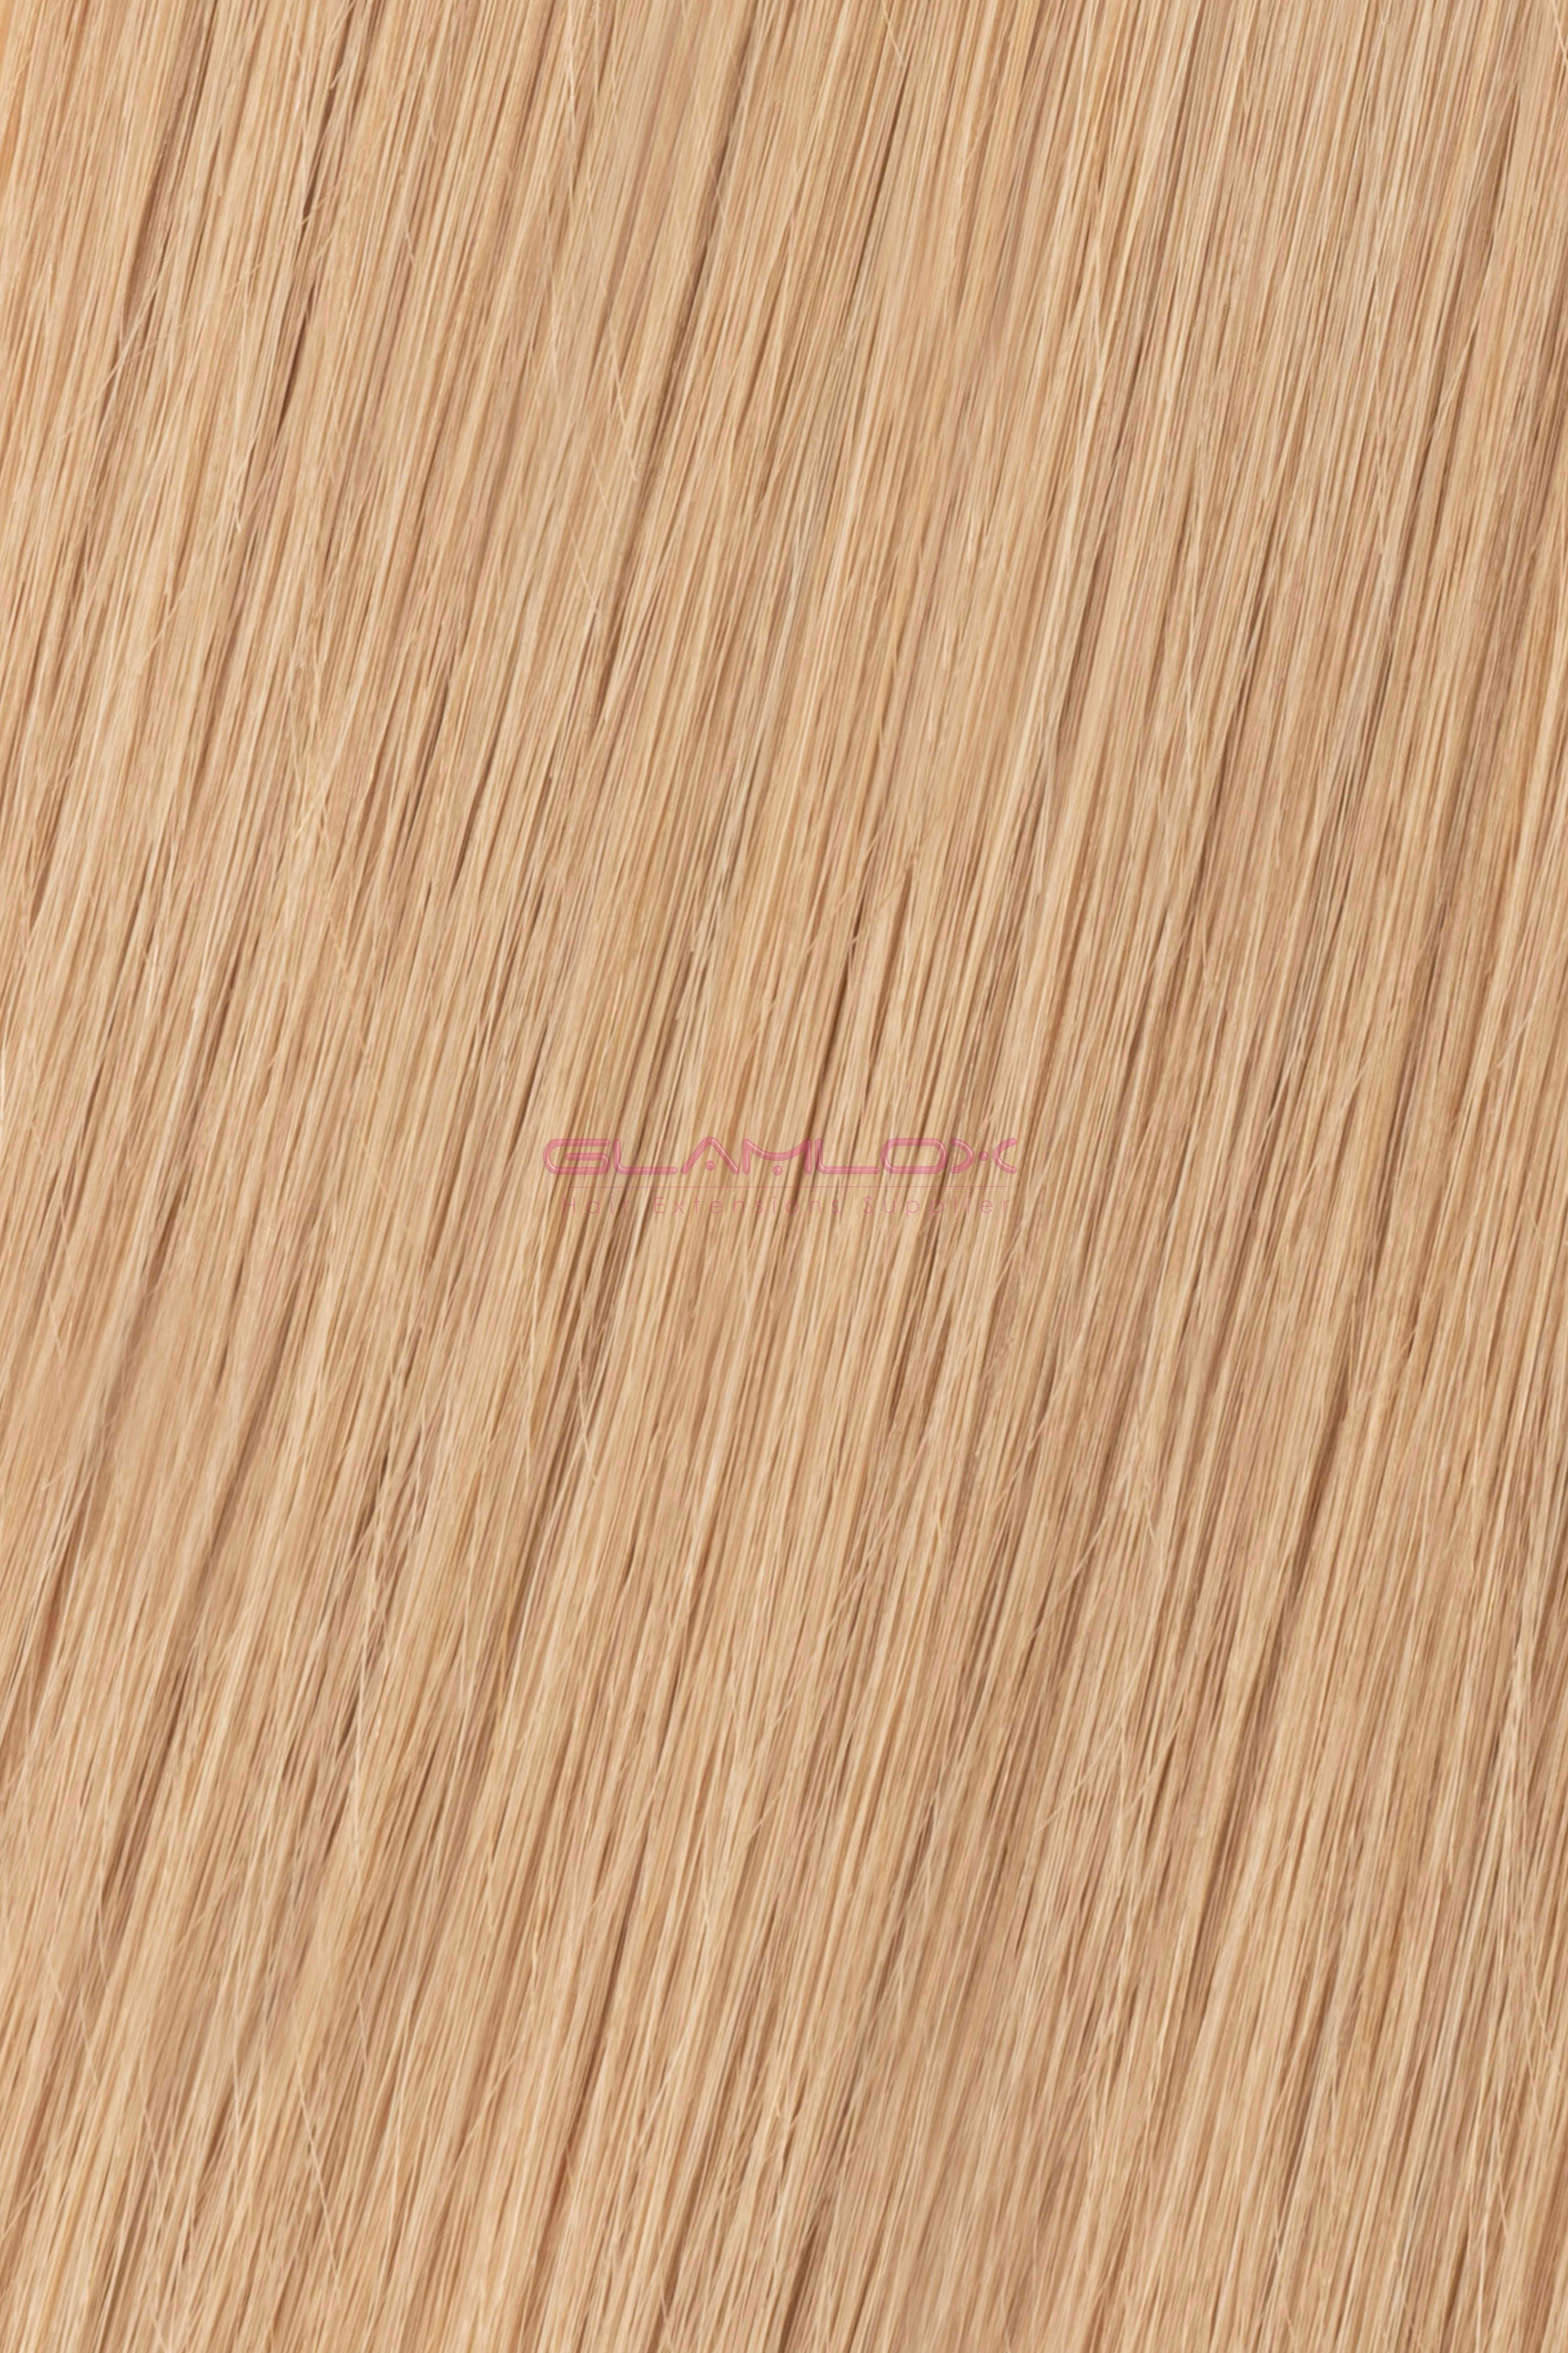 18"-19" I-TIP - Russian Mongolian Double Drawn Remy Human Hair - 100 Strands